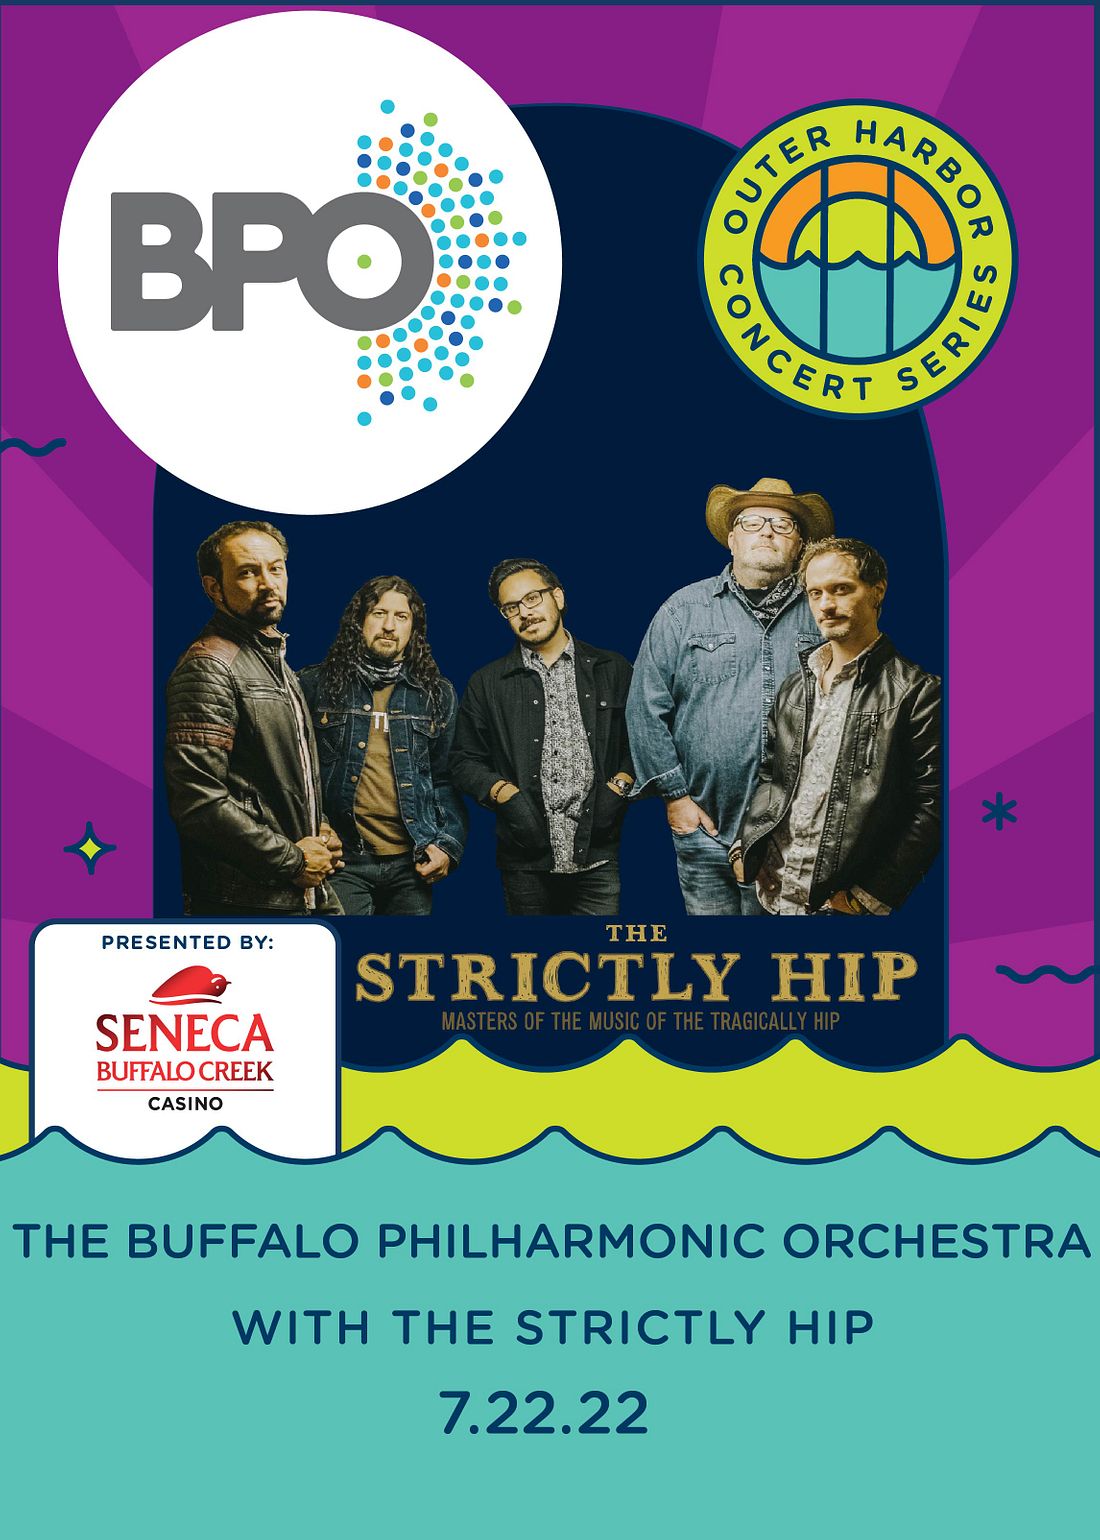 Seneca Casinos Concert BPO + The Strictly Hip Tickets at Lakeside